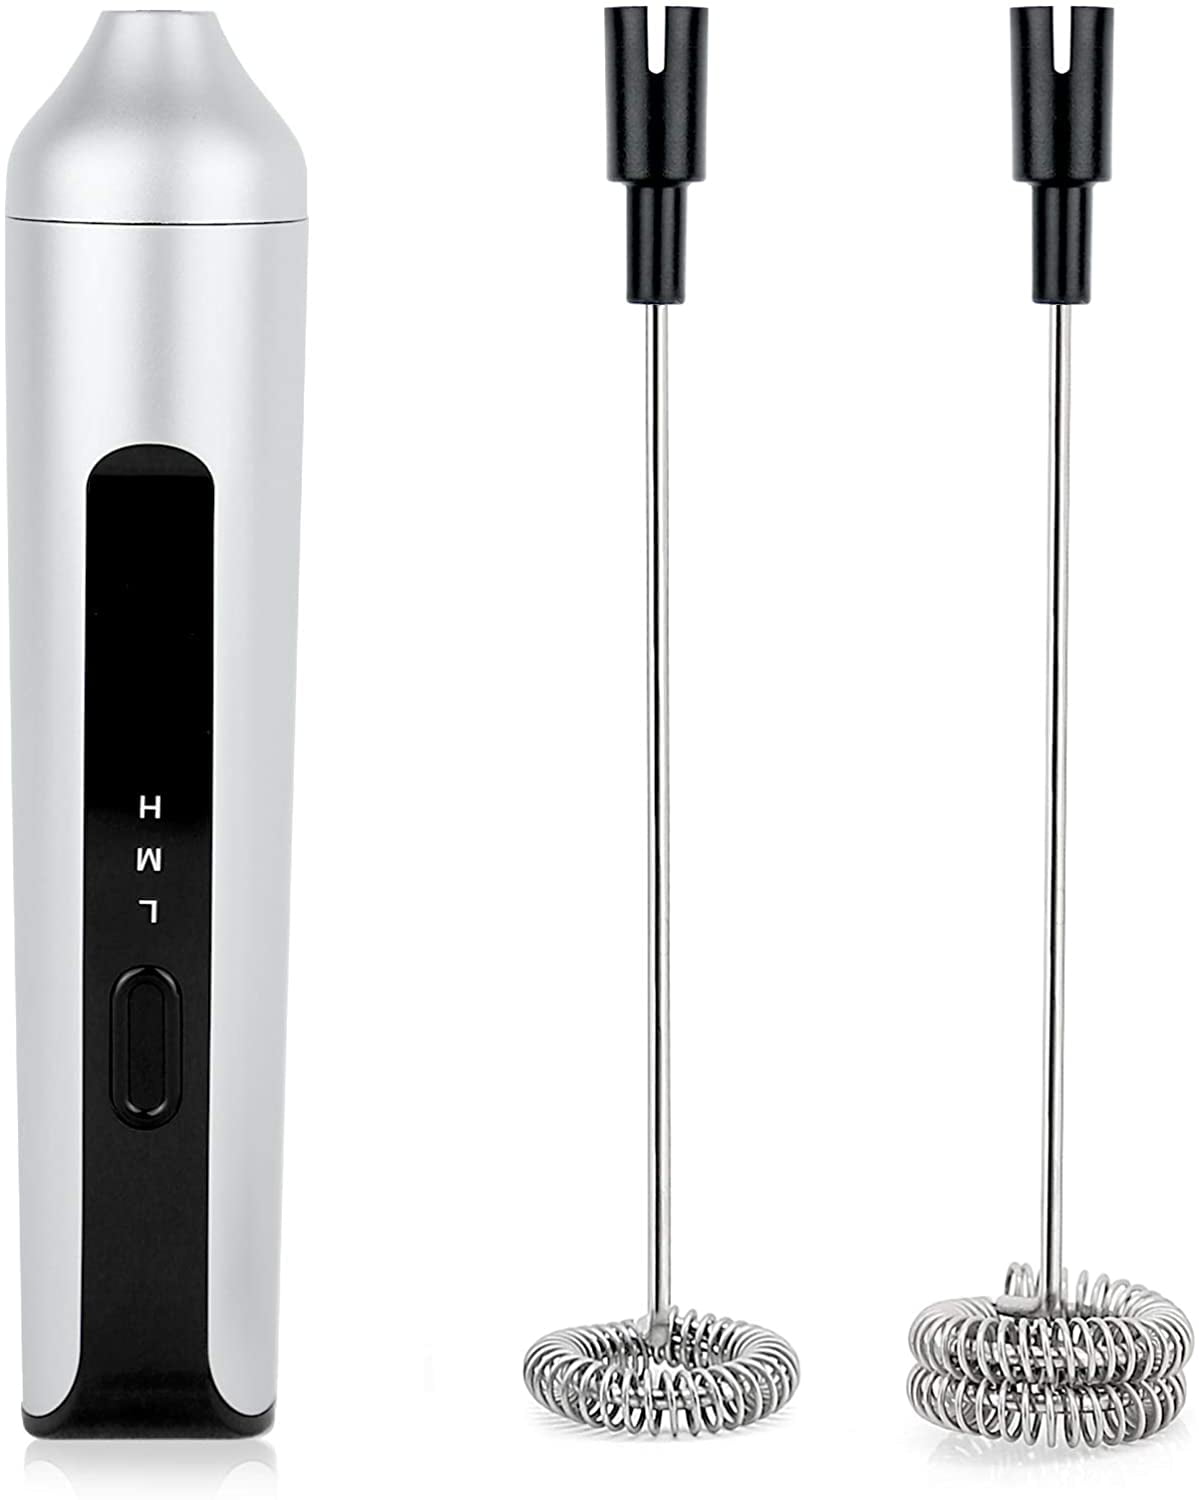 K-Brands Corded Electric Milk Frother with Plug in - Handheld Electric  Whisk Stirrer Whipper - Foam Maker for Coffee, Latte, Cappuccino, Hot  Chocolate